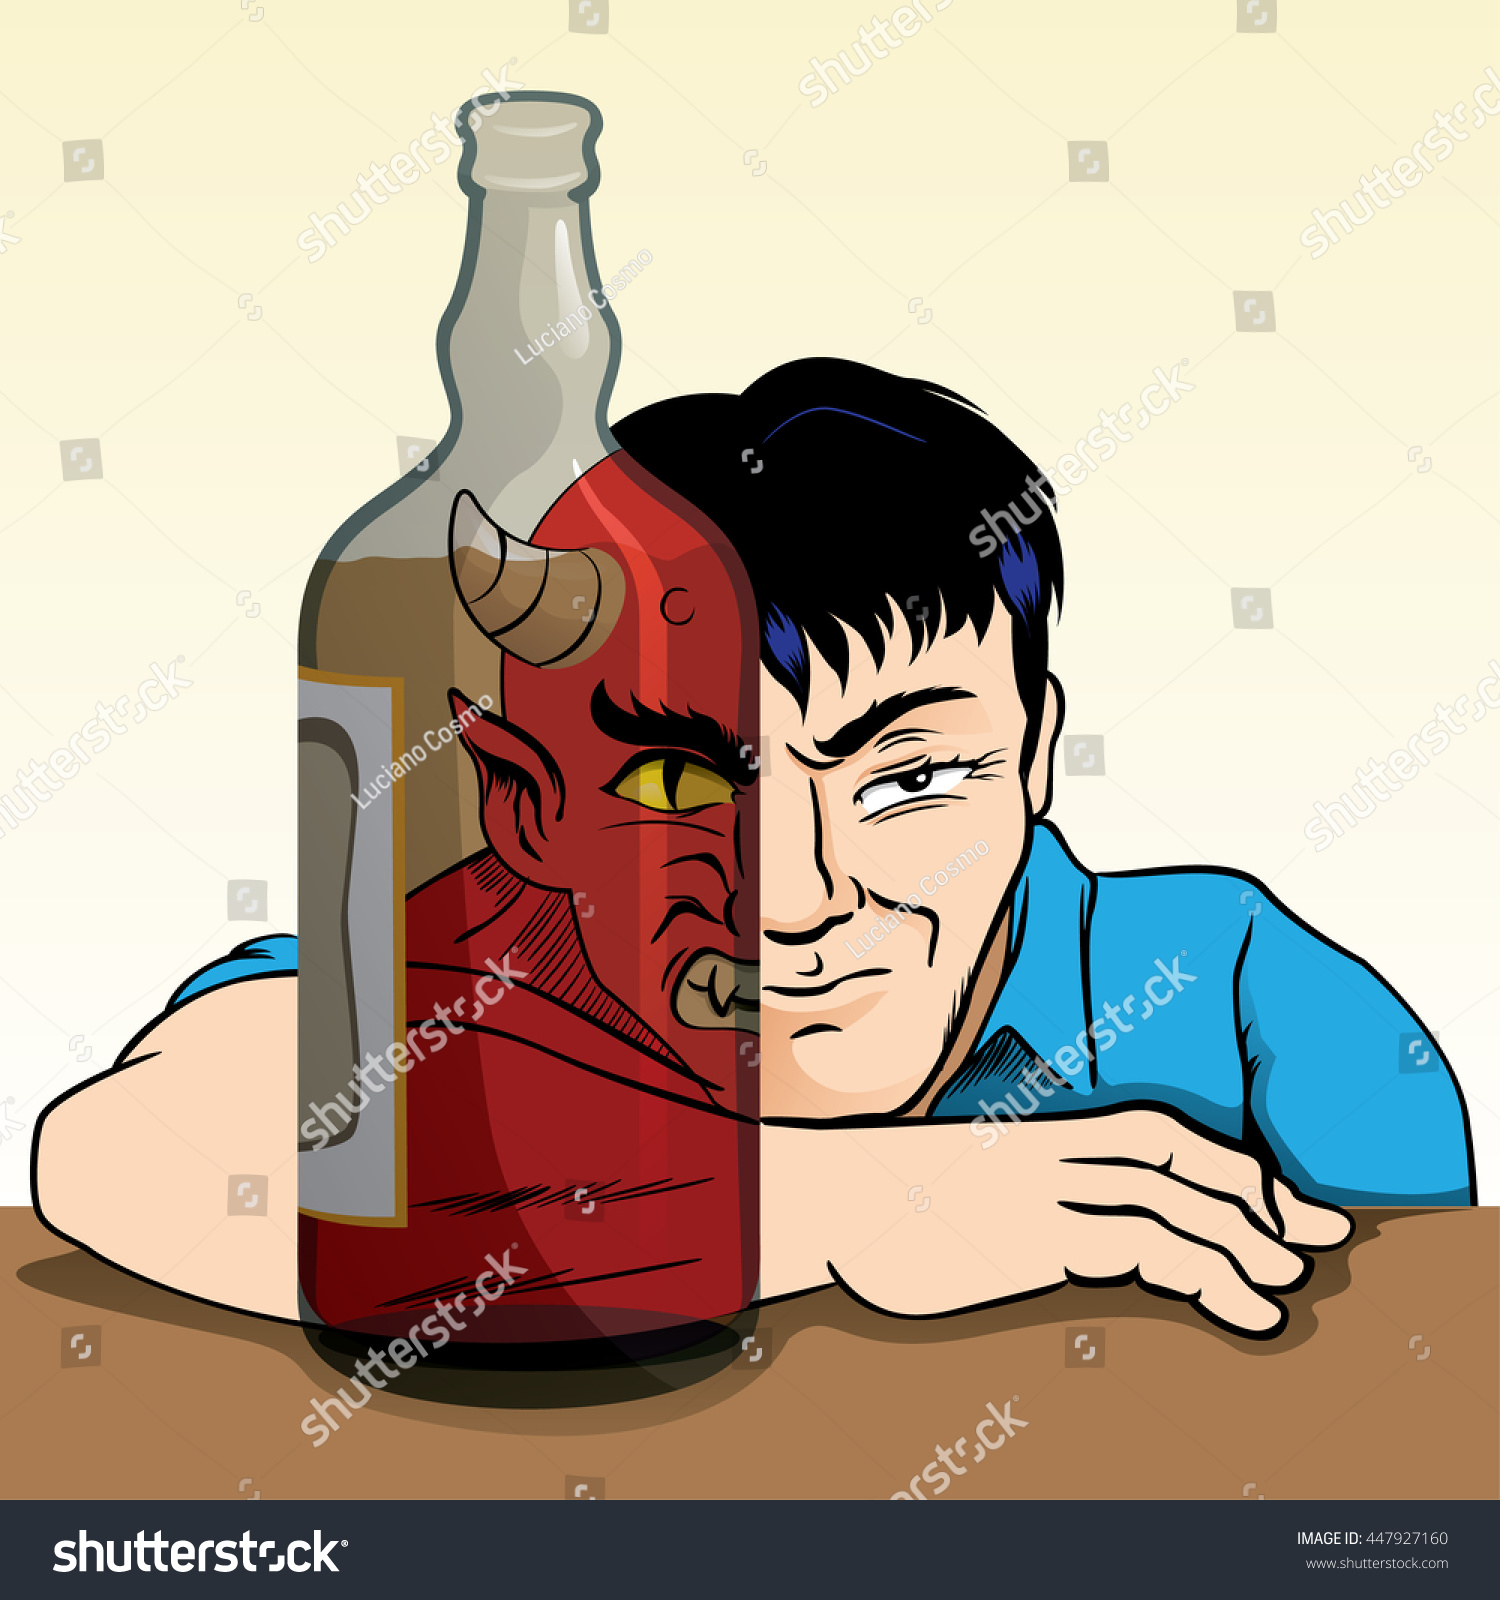 SVG of drunk person turning into a demon due to alcohol trough of alcohol and can see the alter ego of man. Ideal for awareness campaigns svg